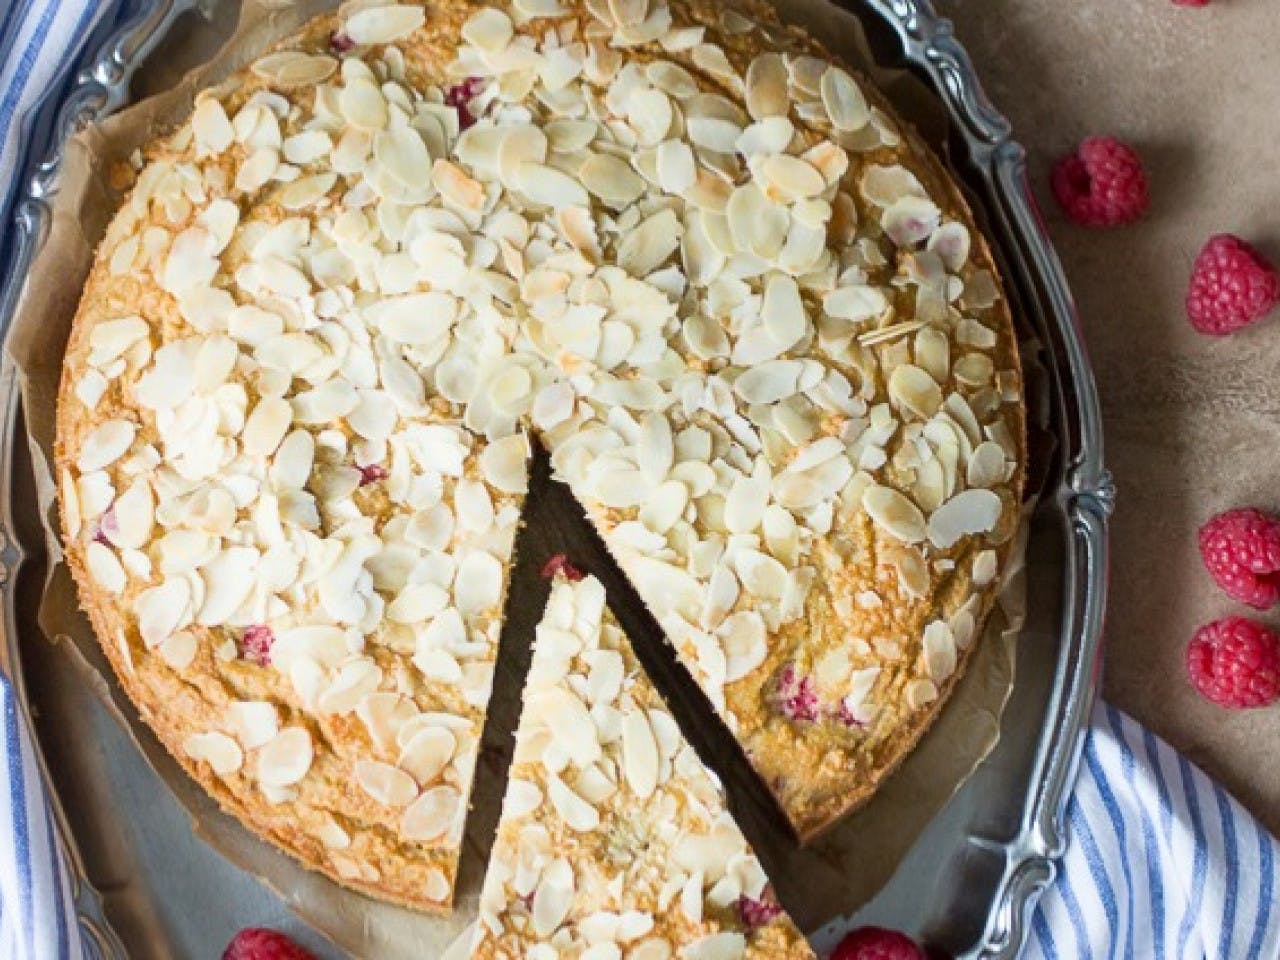 Almond bread with raspberries